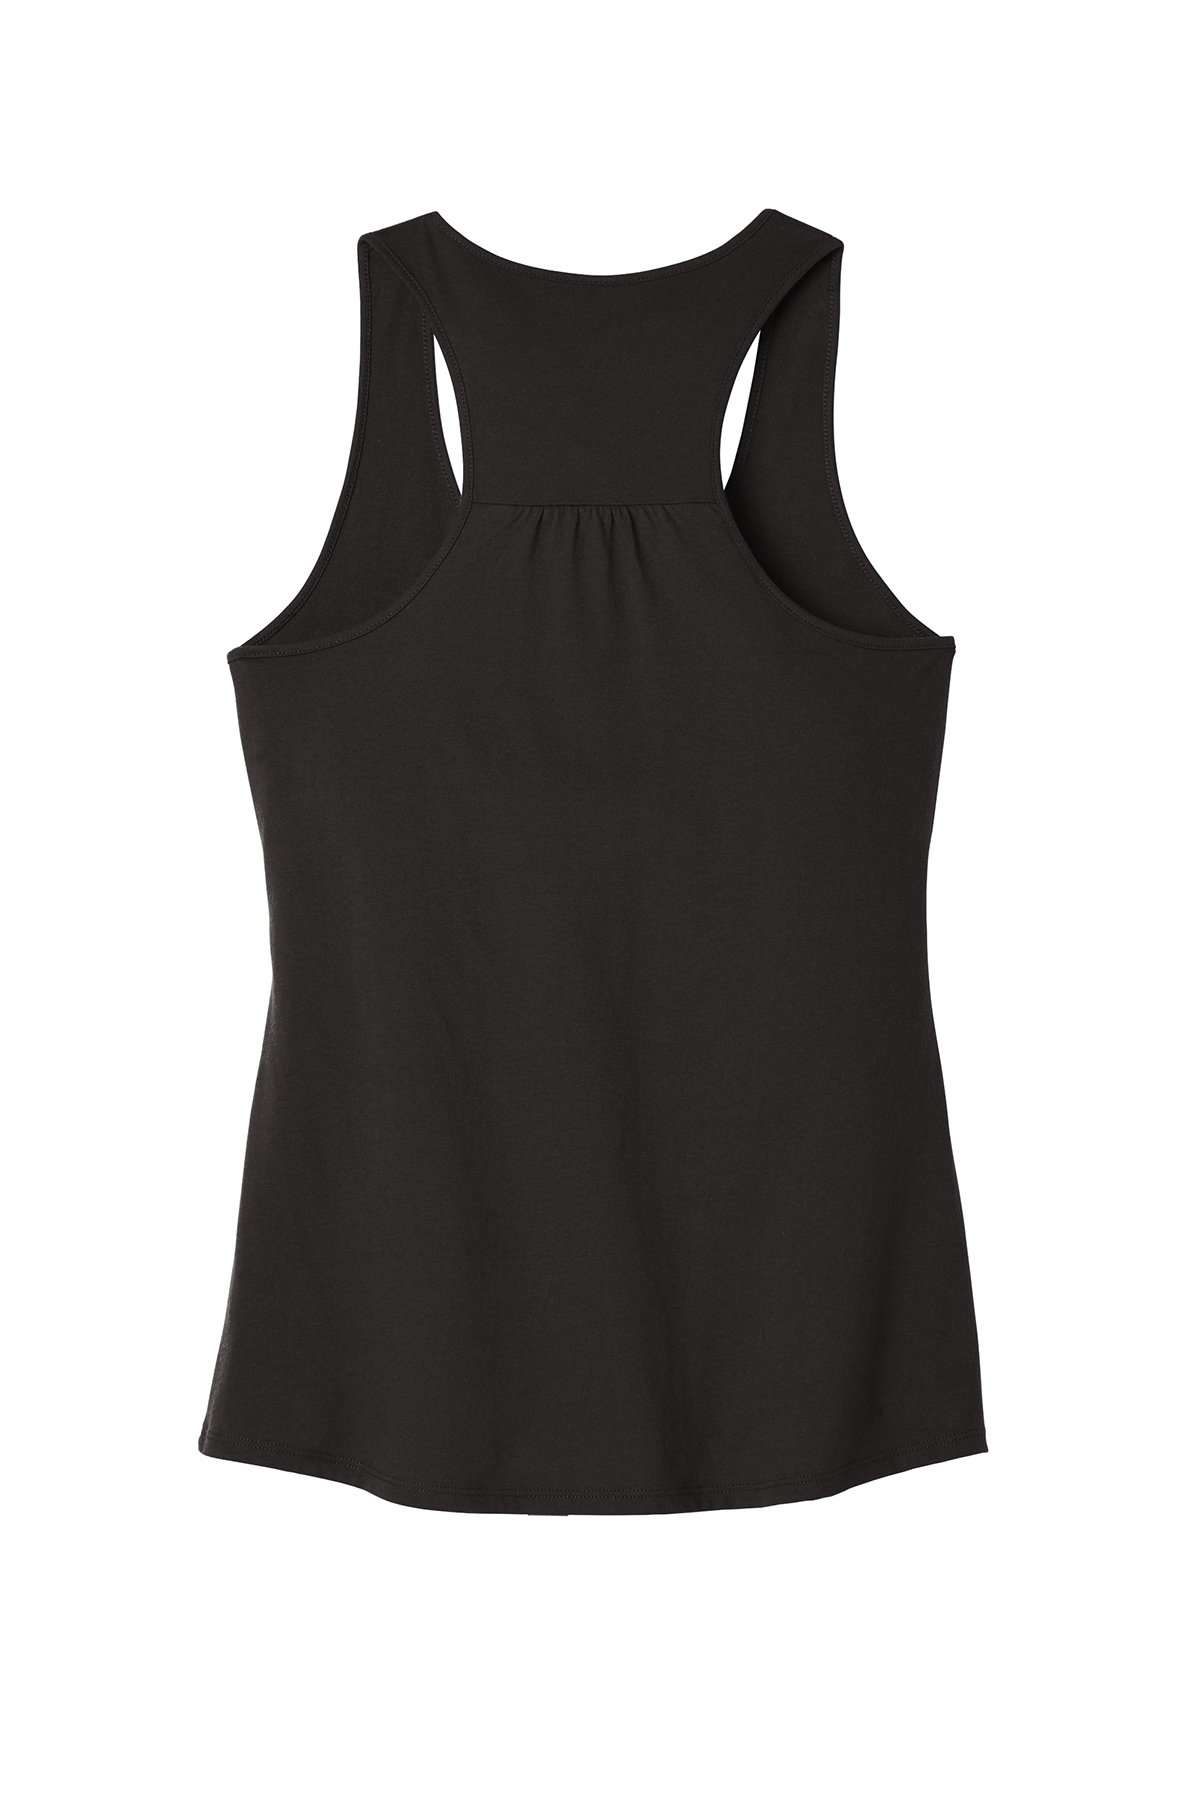 District Women’s V.I.T. Racerback Tank | Product | District